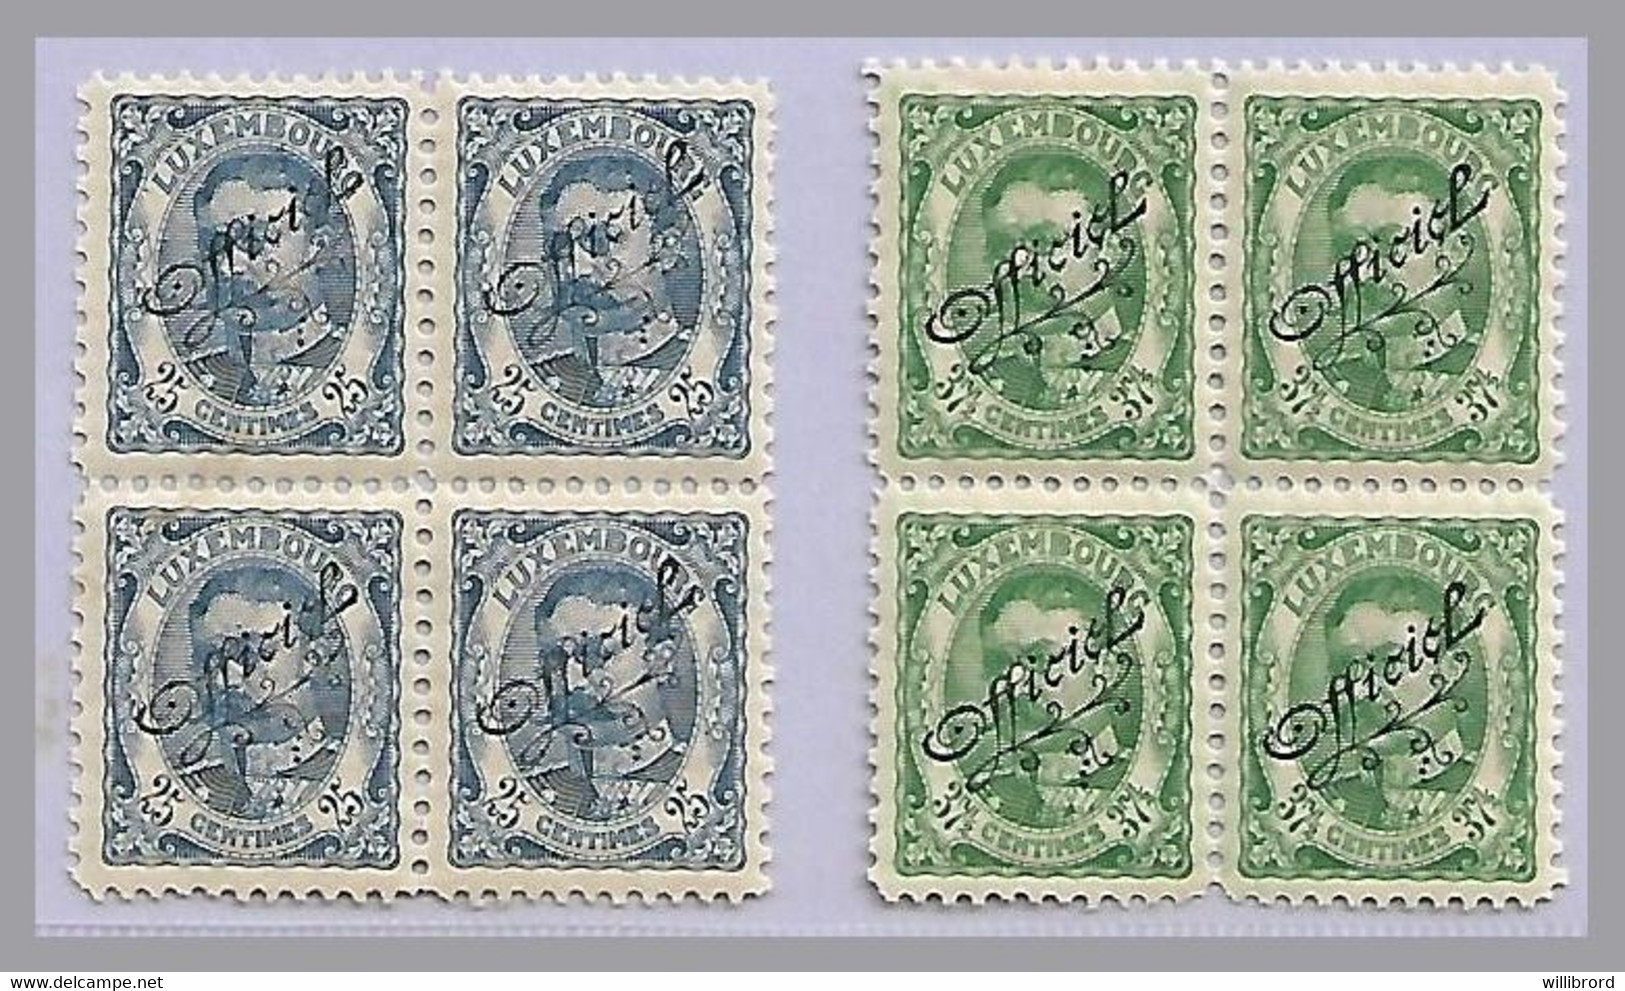 LUXEMBOURG - G.D. William IV OFFICIALS  - 25c & 37½c Blocks Of 4 - Mint Never Hinged - 1906 Willem IV